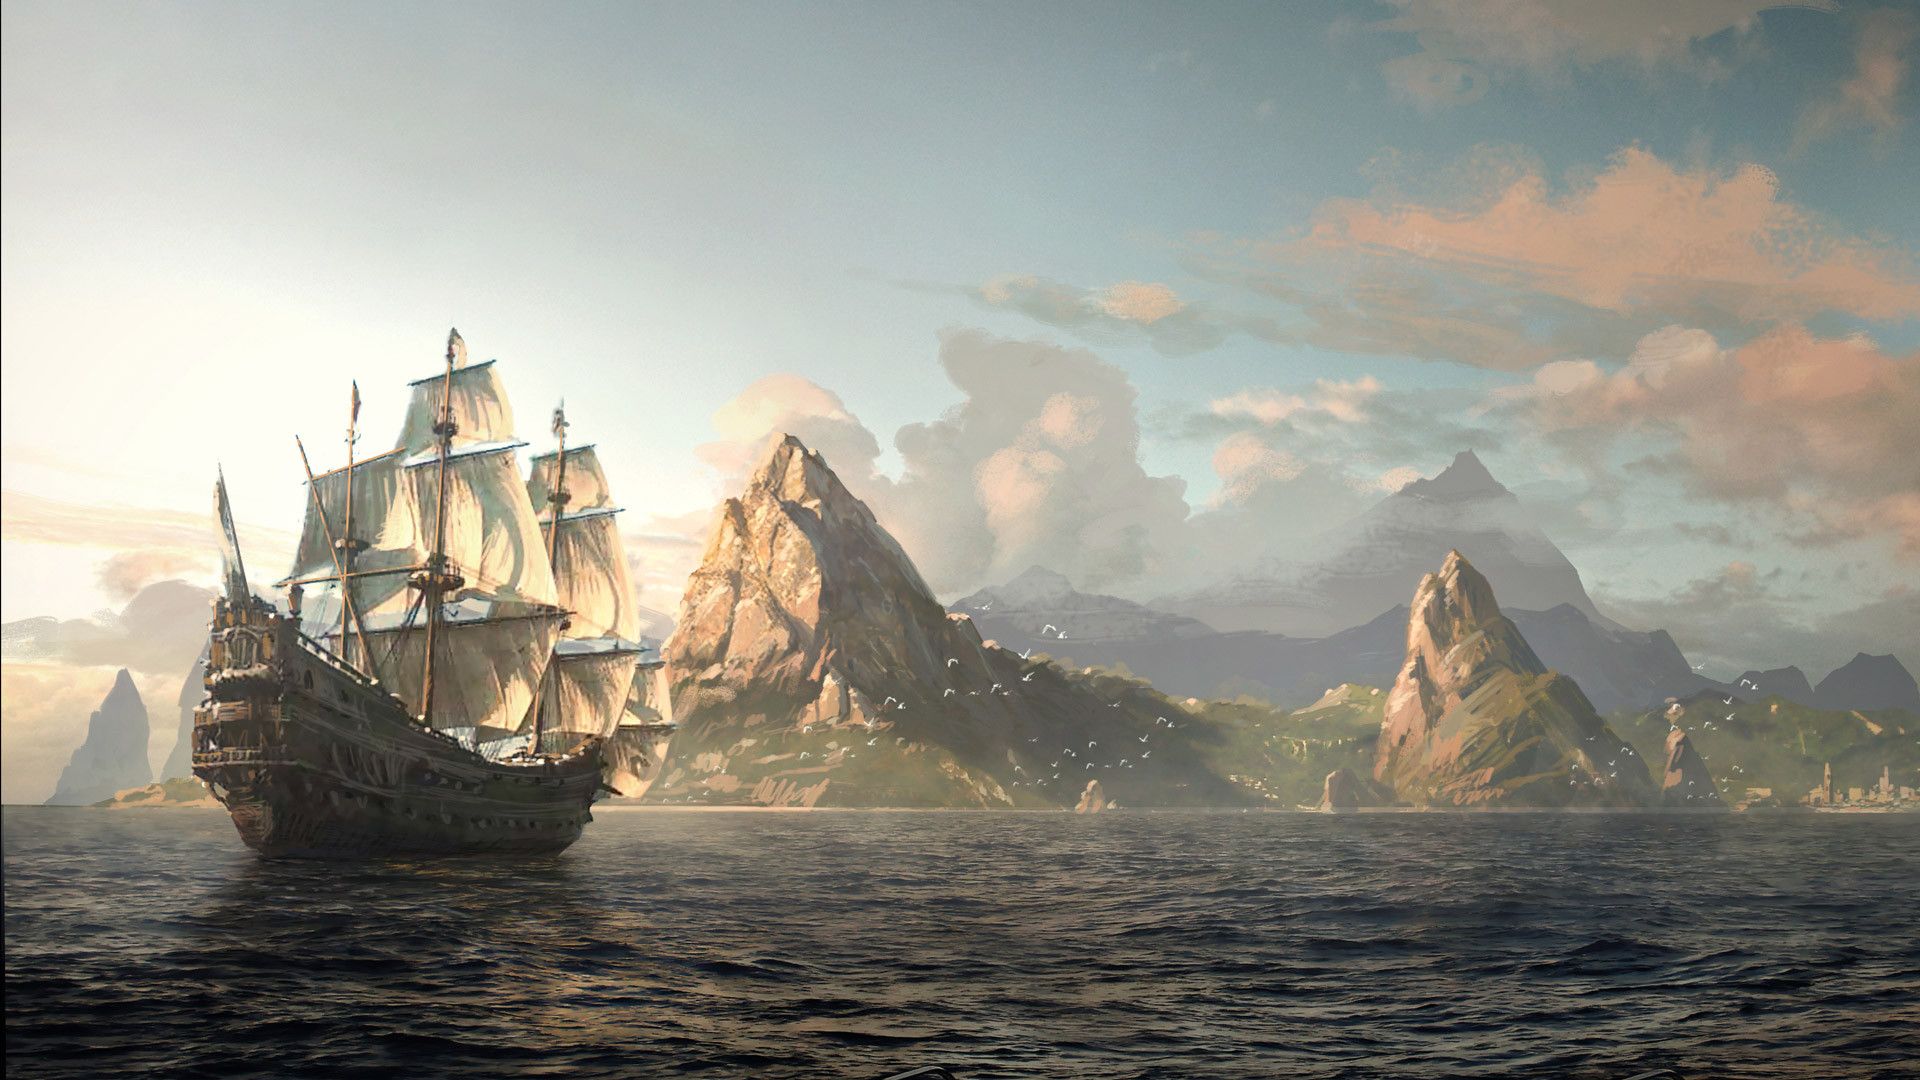 Beautiful concept art for upcoming Assassins Creed game